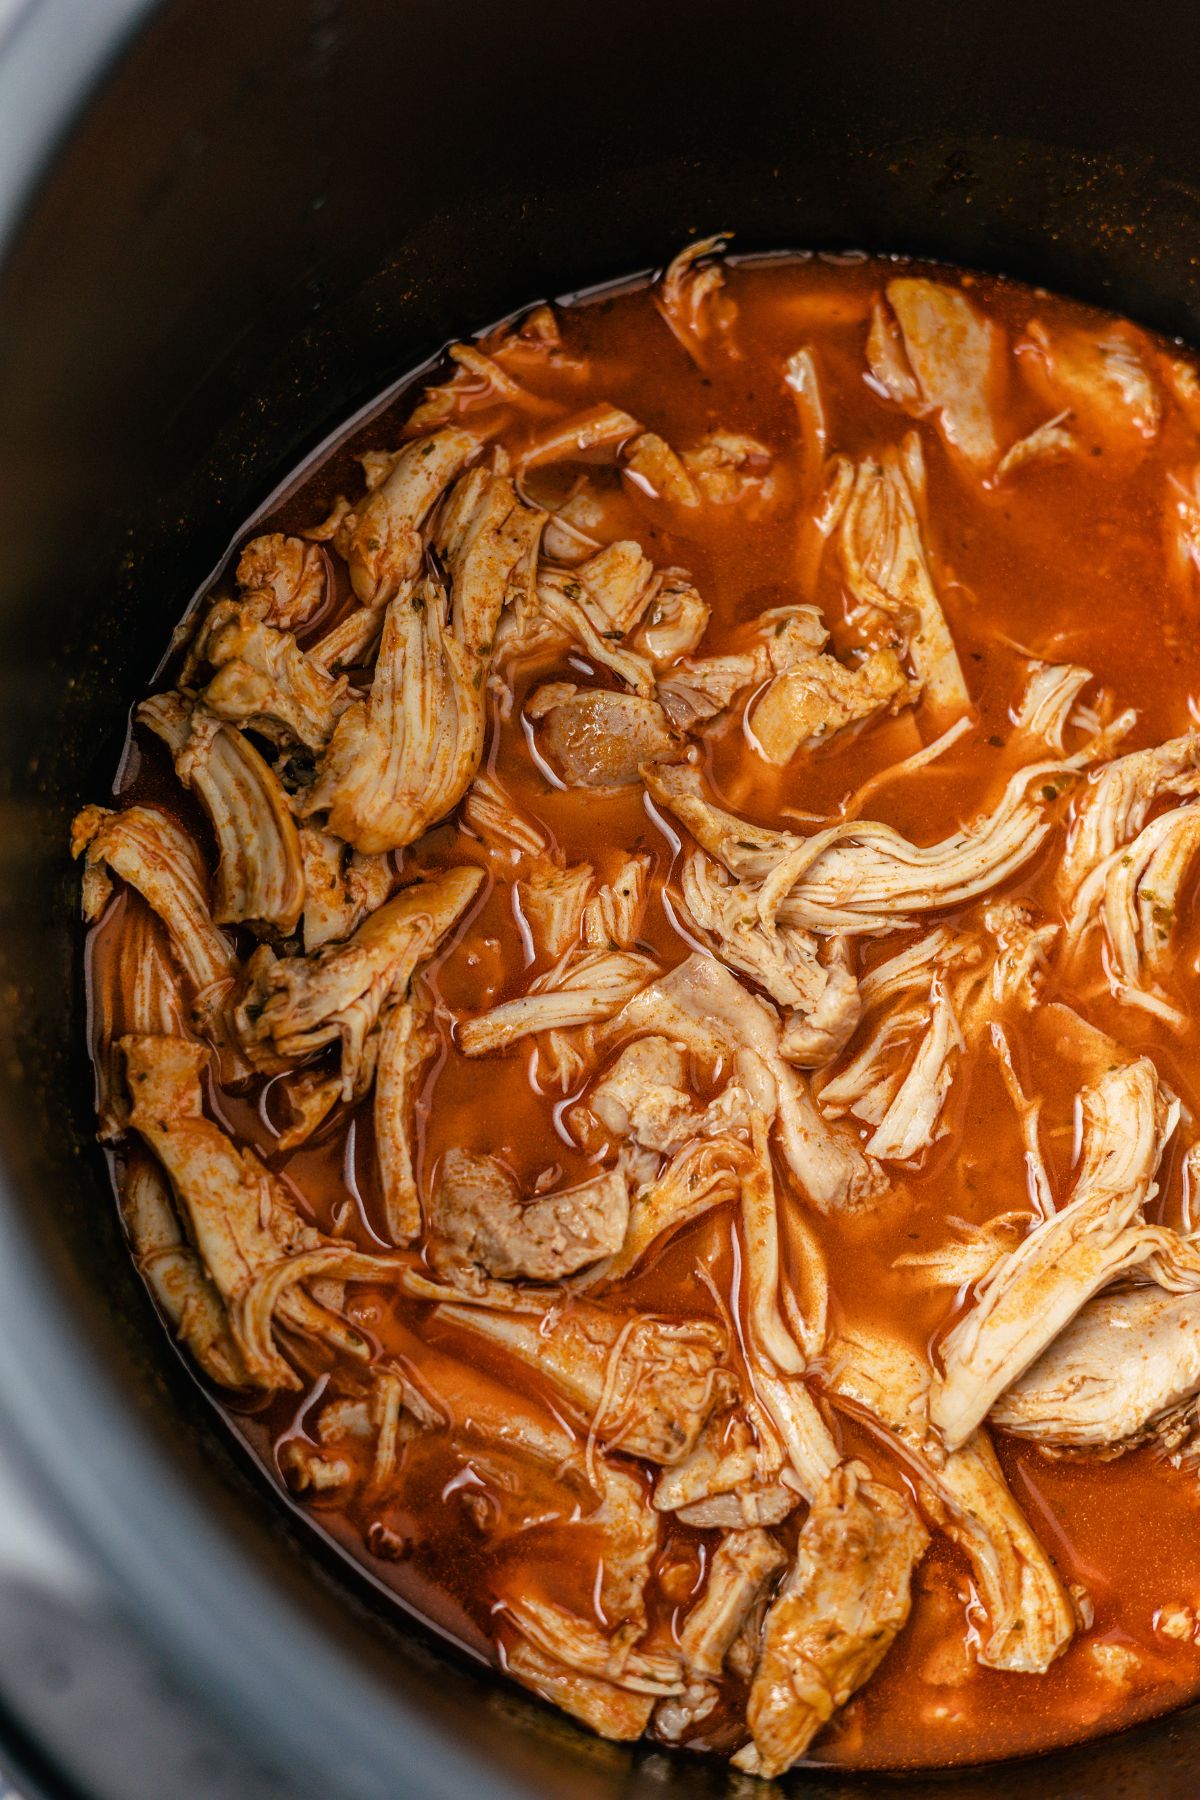 mixing shredded chicken with ranch seasoning, smoked paprika, hot sauce, and broth in a cooking pot